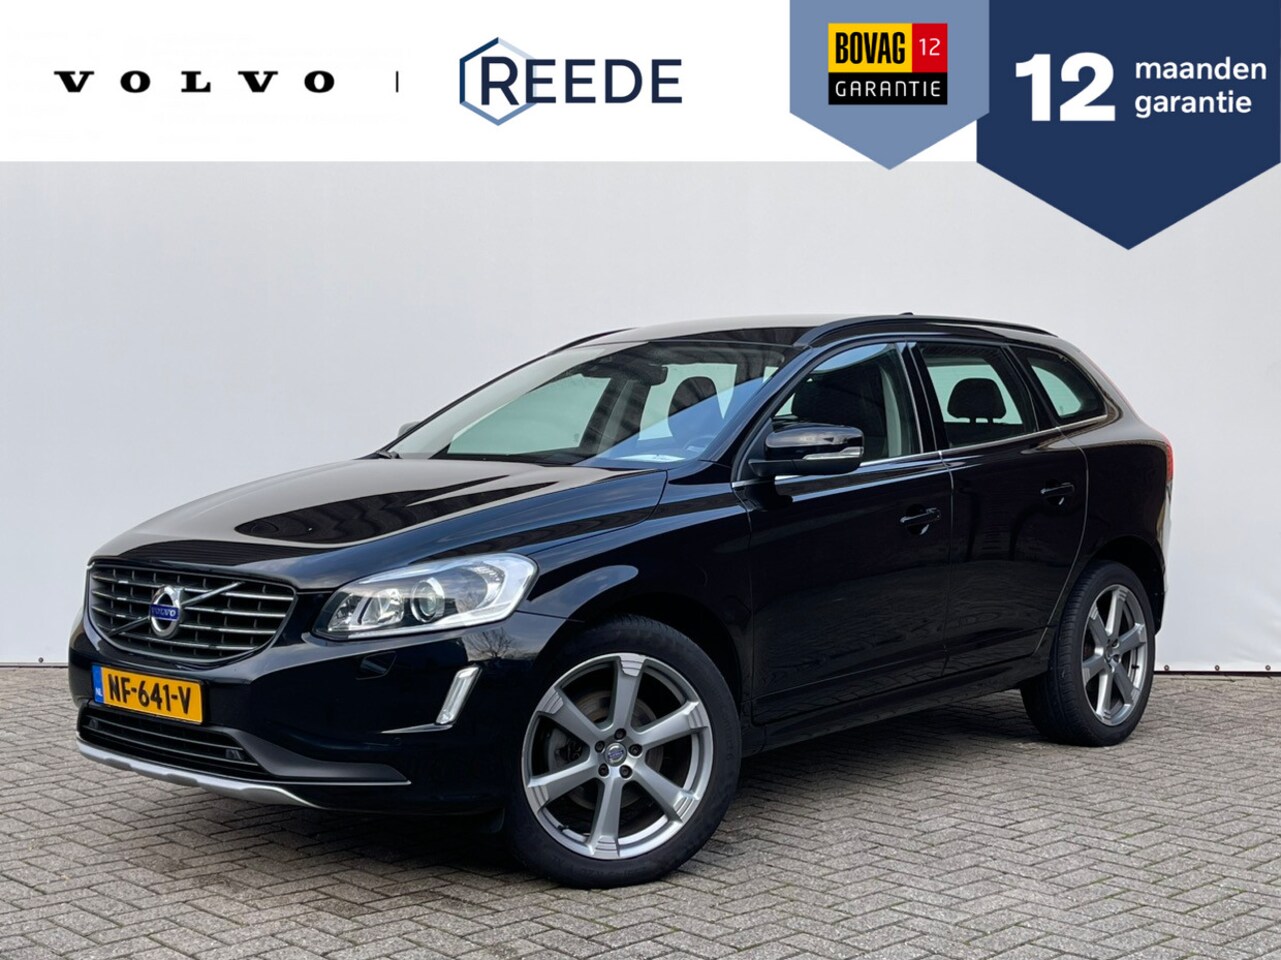 Volvo XC60 - 2.0 D3 FWD Momentum Business Pack   Family Line - AutoWereld.nl